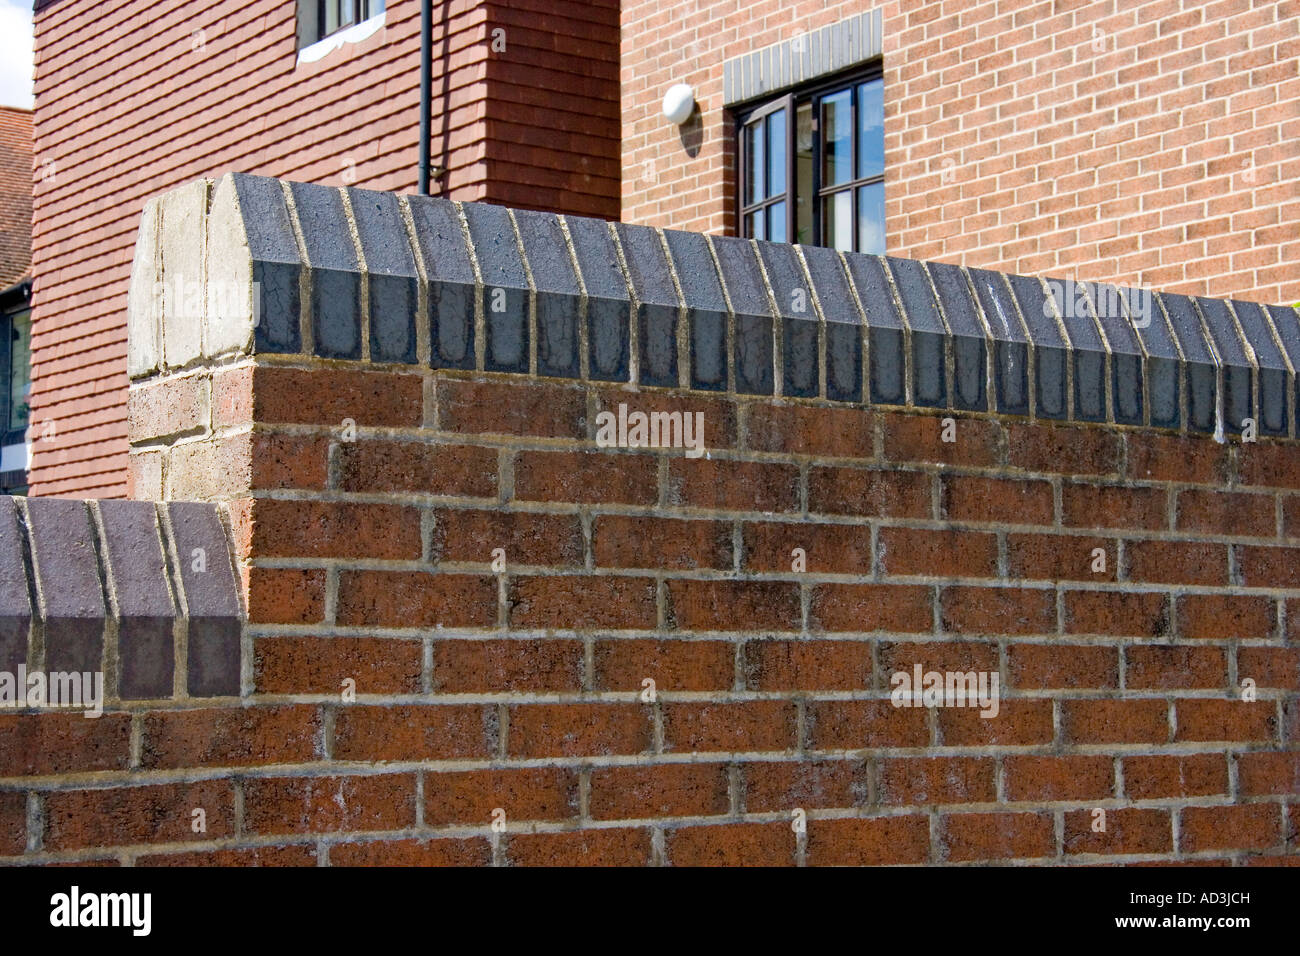 Soldier course of bricks used as decorative feature along the top of a wall and along the top of a house window Stock Photo